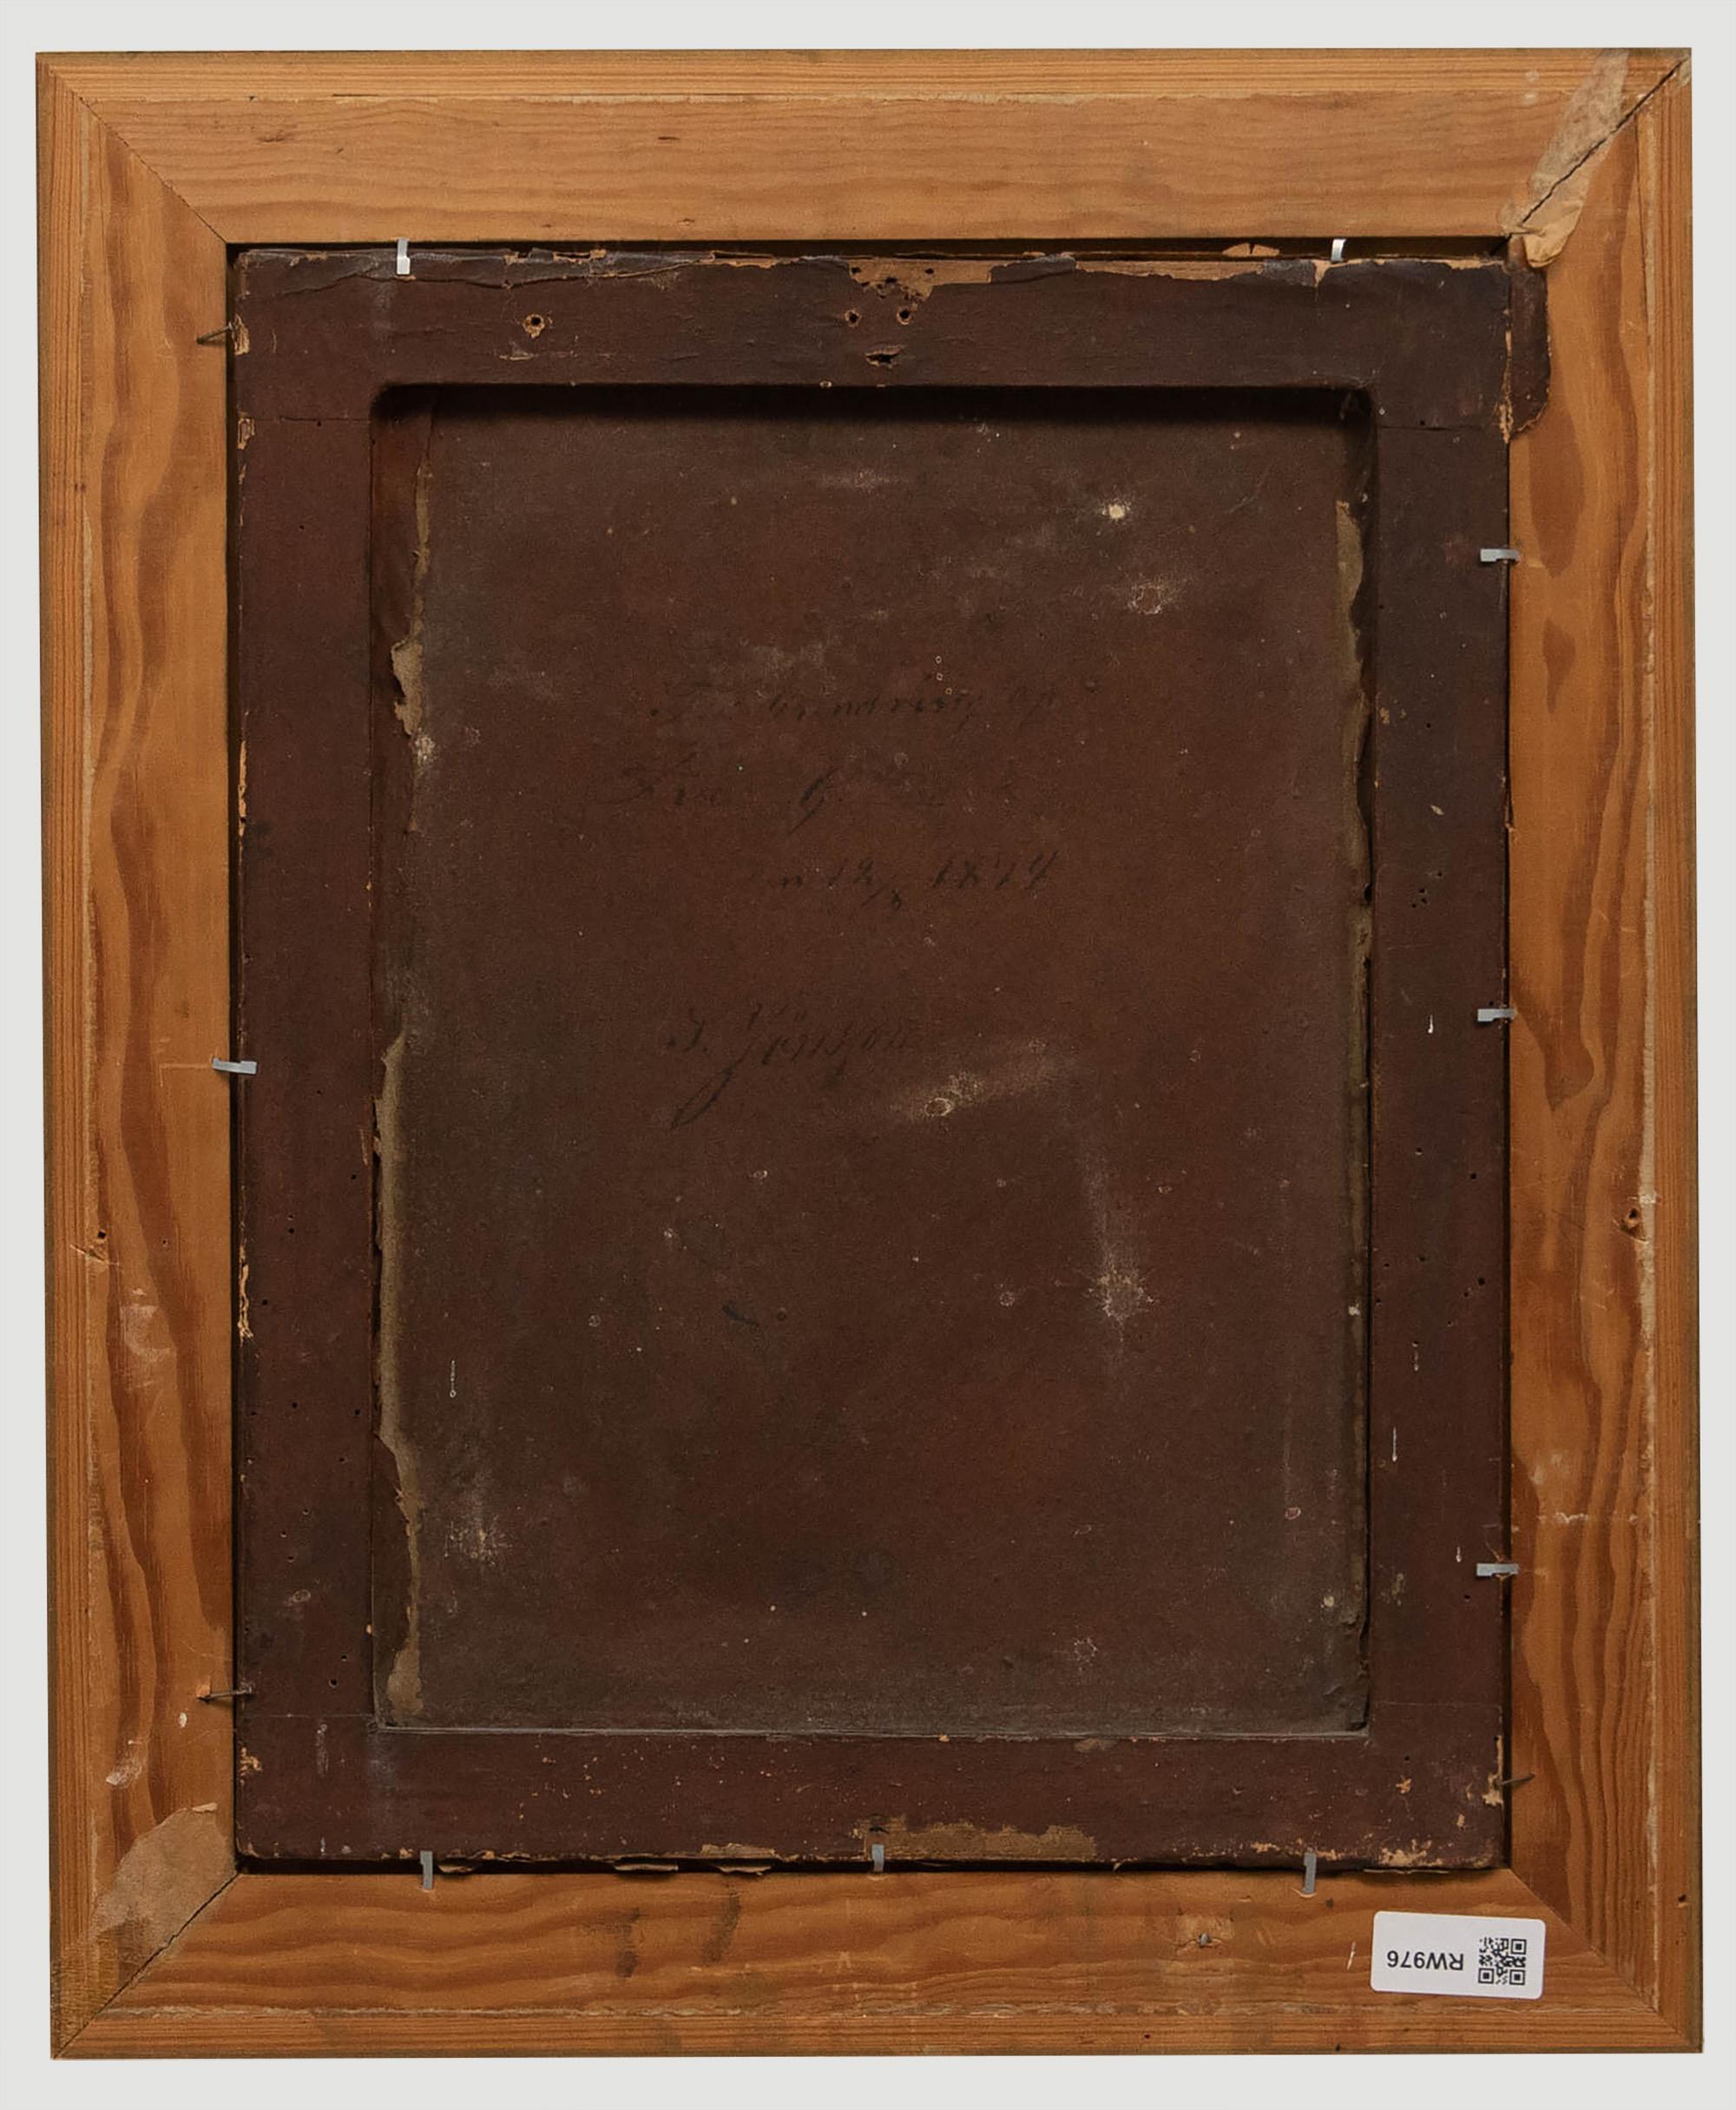 Dated and illegibly signed to the reverse of the board. Presented in a gilt frame. On board.